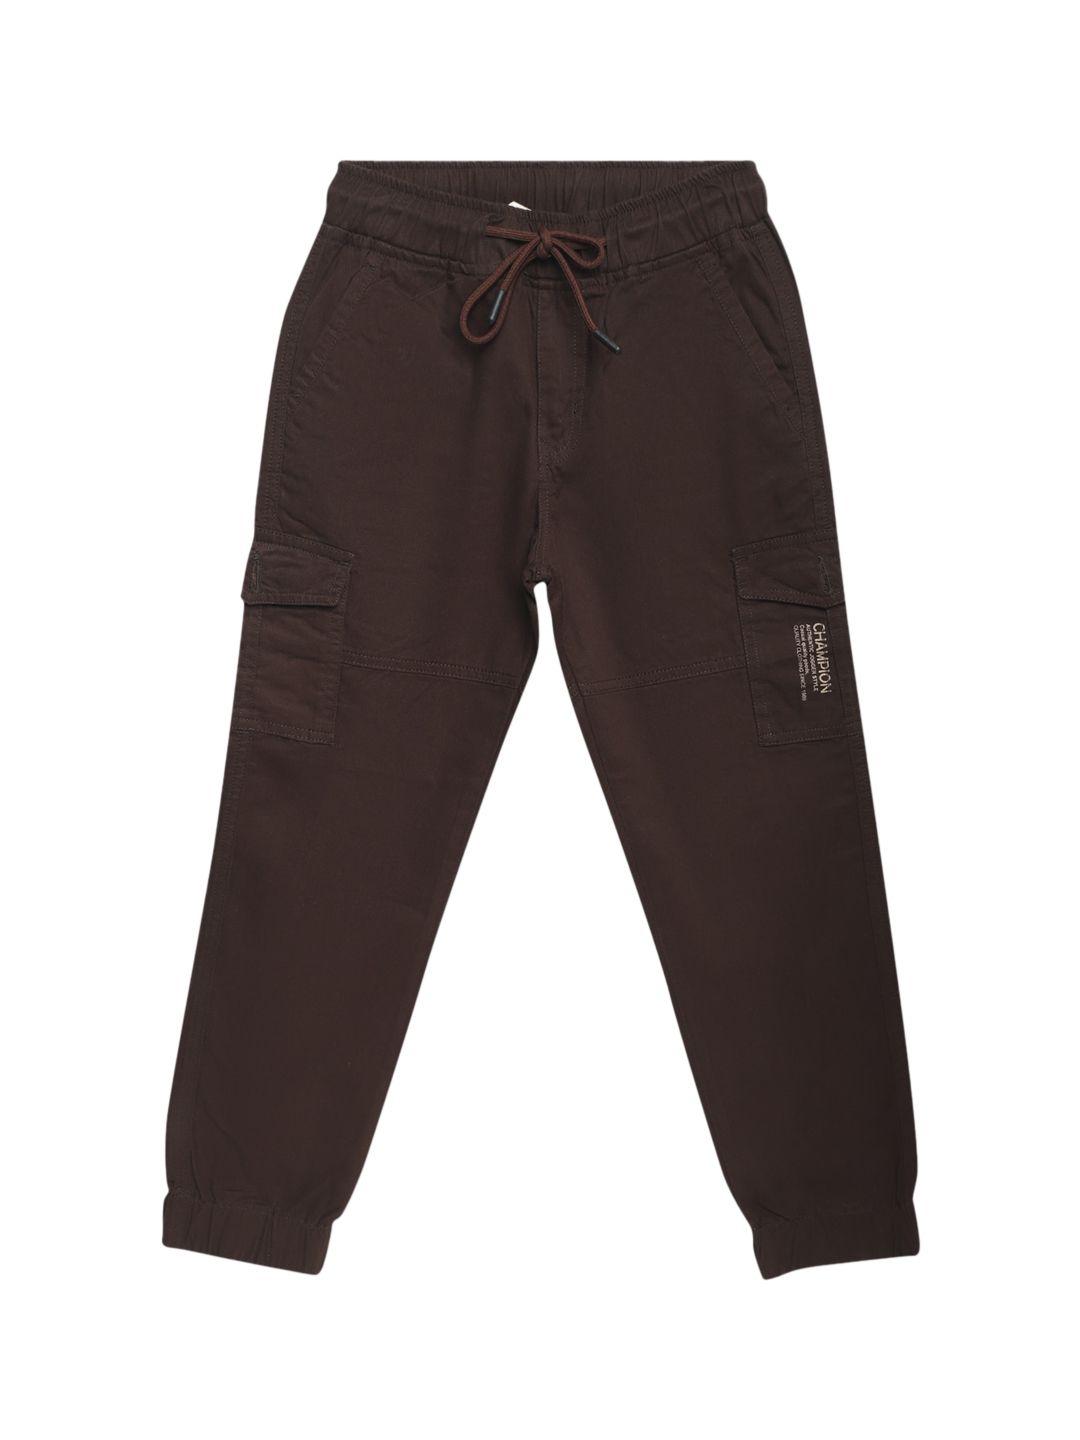 cantabil-boys-cotton-mid-rise-cargos-trousers